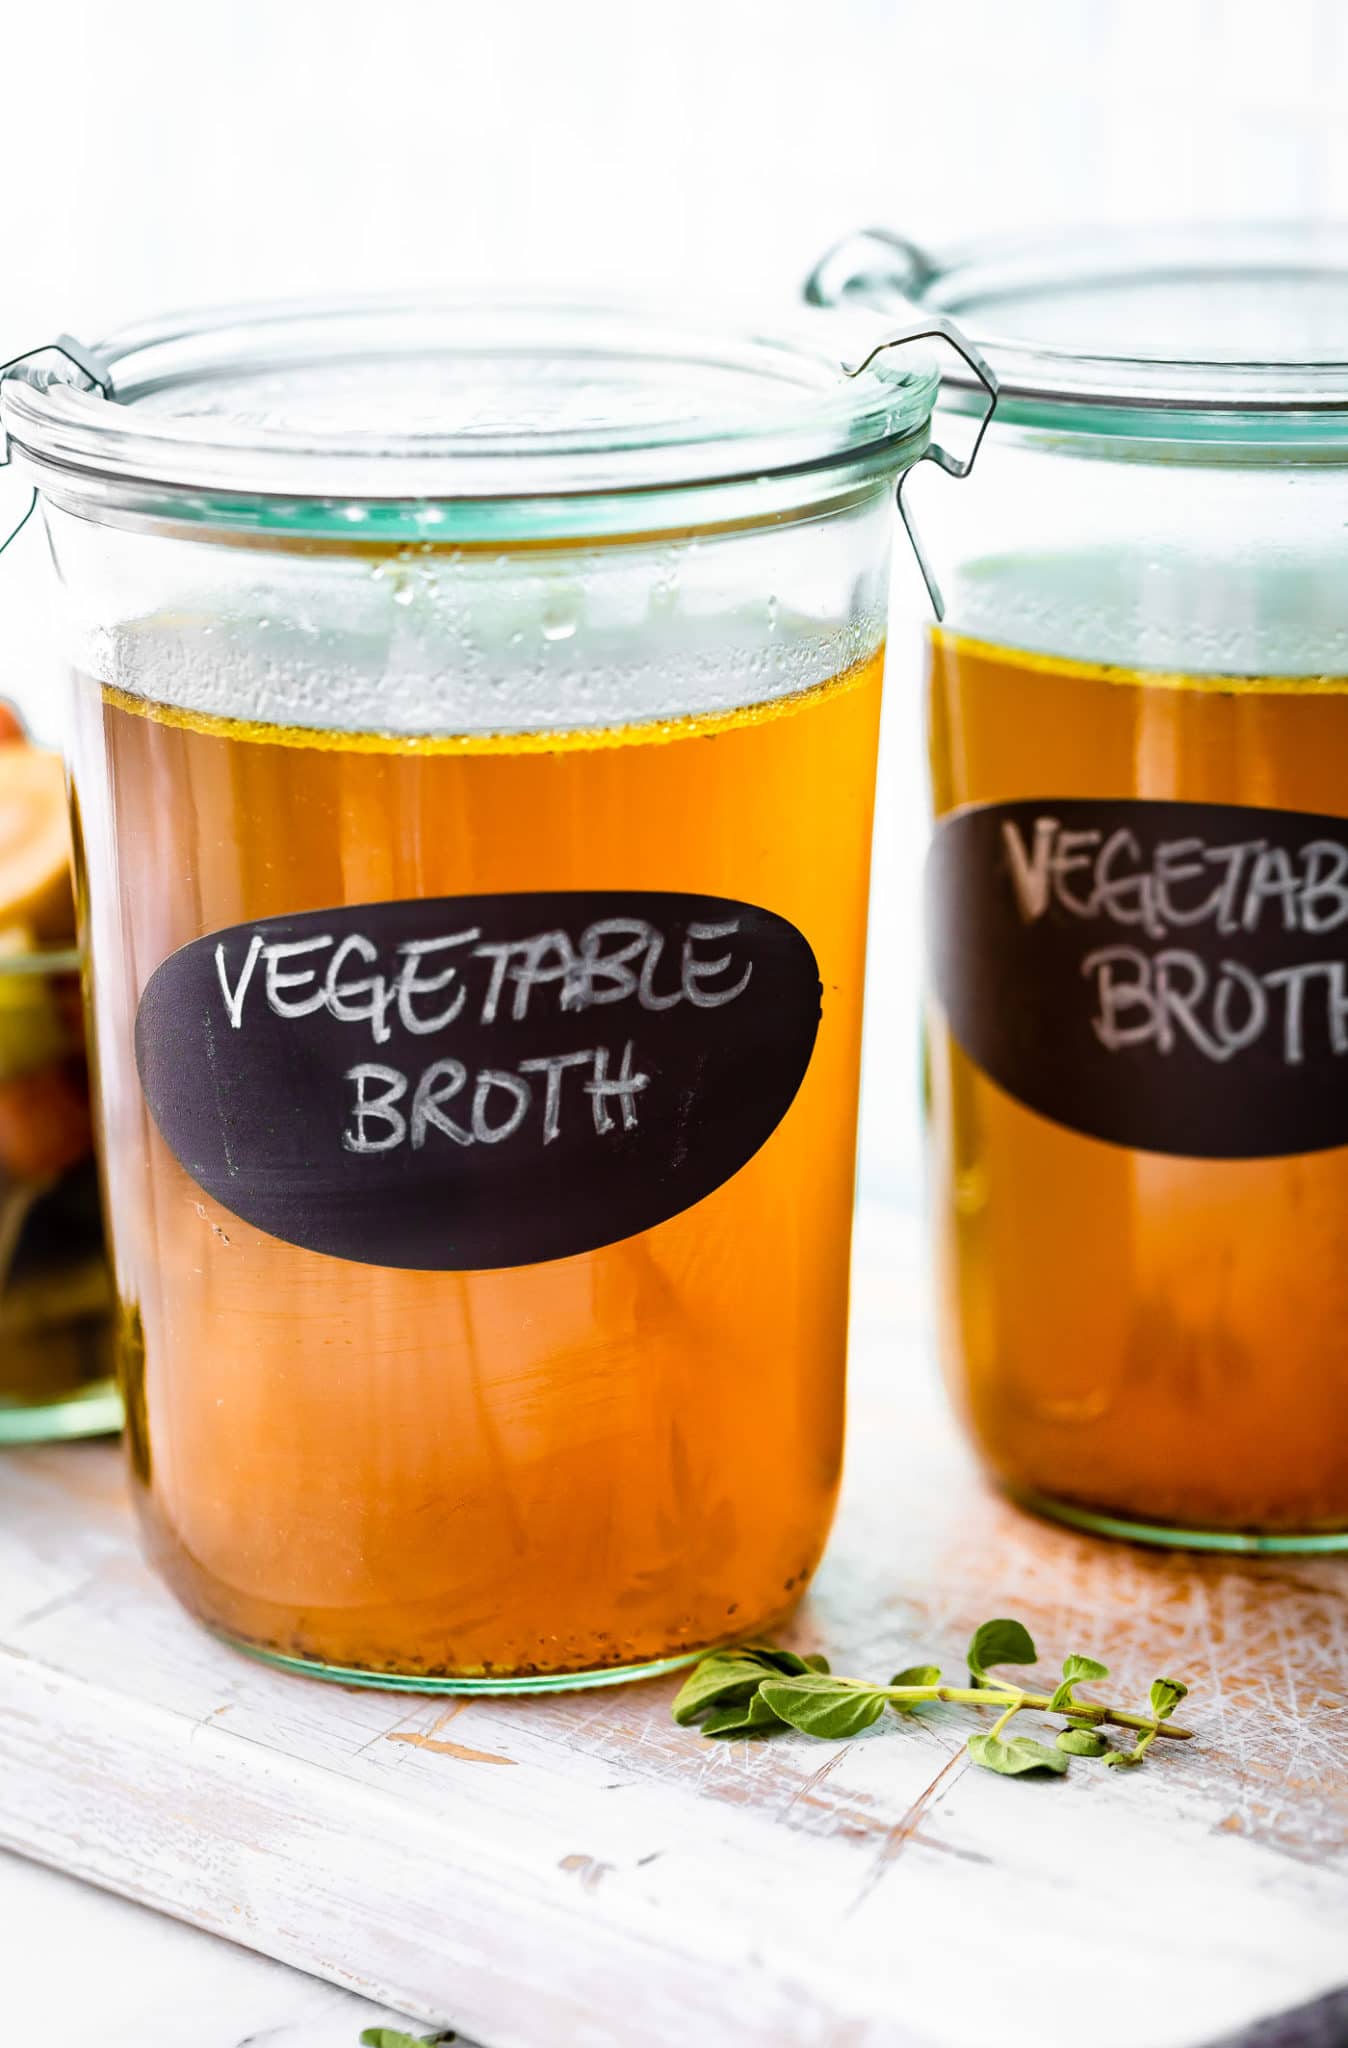 glass jars of homemade vegetable broth with "vegetable broth" written in white